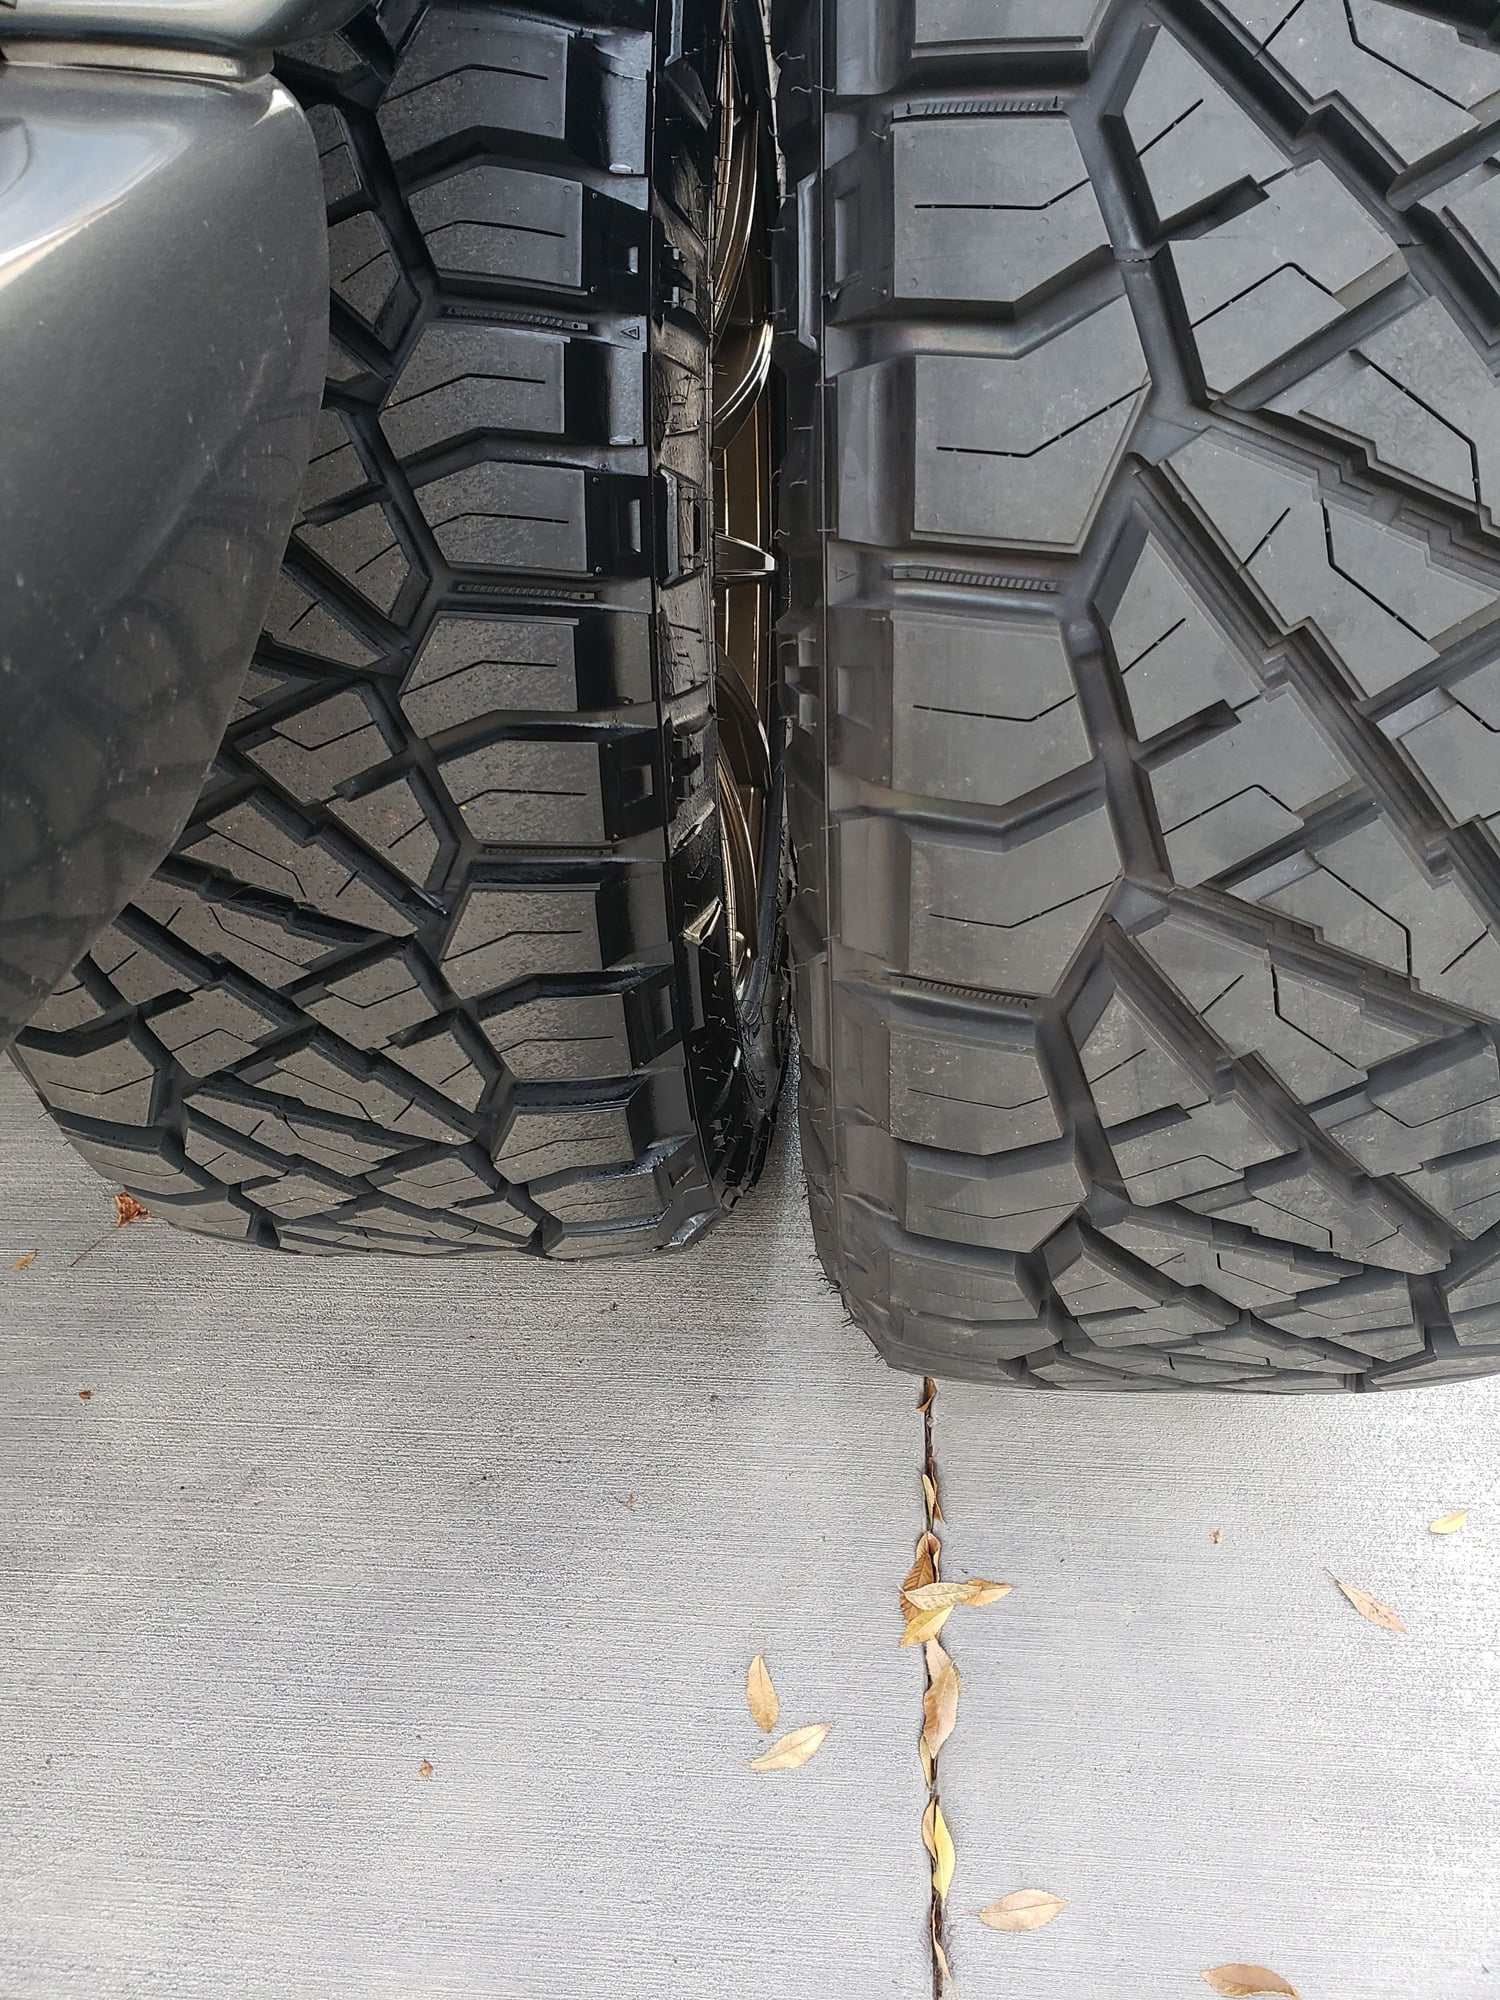 Wheels and Tires/Axles - 35x12.50/20 Nitto Ridge Grappler - Used - Torrance, CA 90504, United States